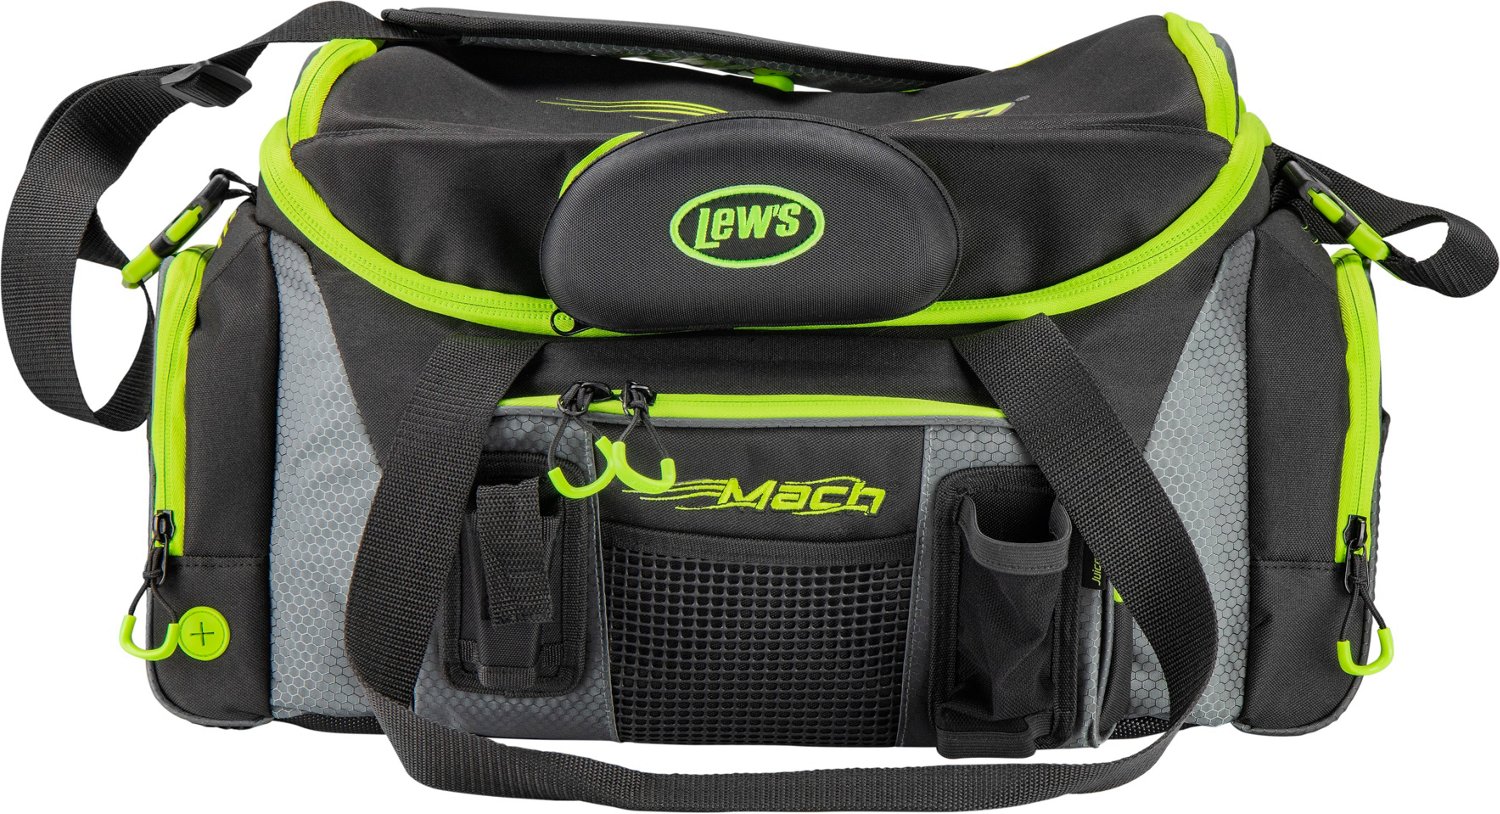 Lew's Mach Tackle Bag  Free Shipping at Academy